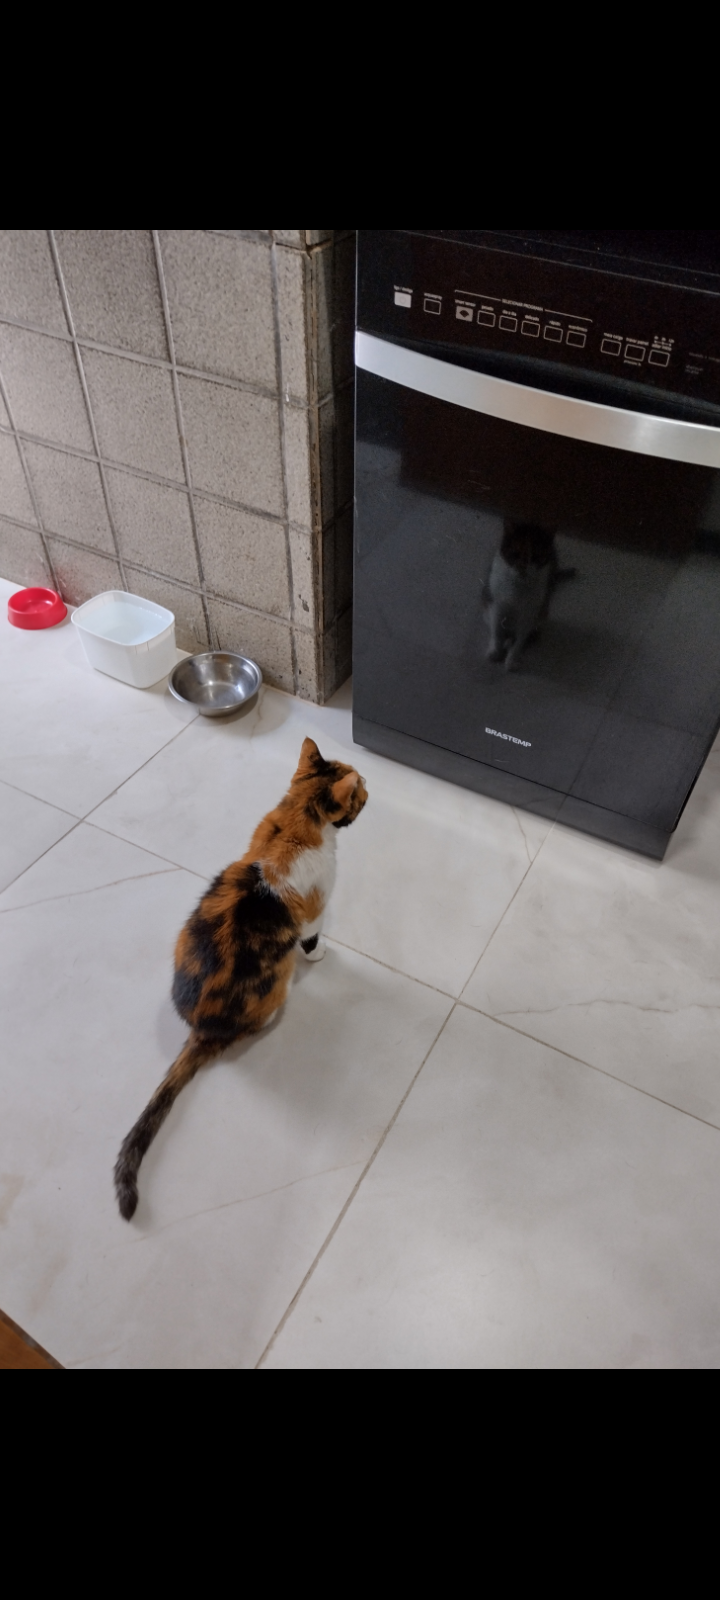 my cat (19 years) spends all day looking at the mirror, does anyone know why? is it a common thing?